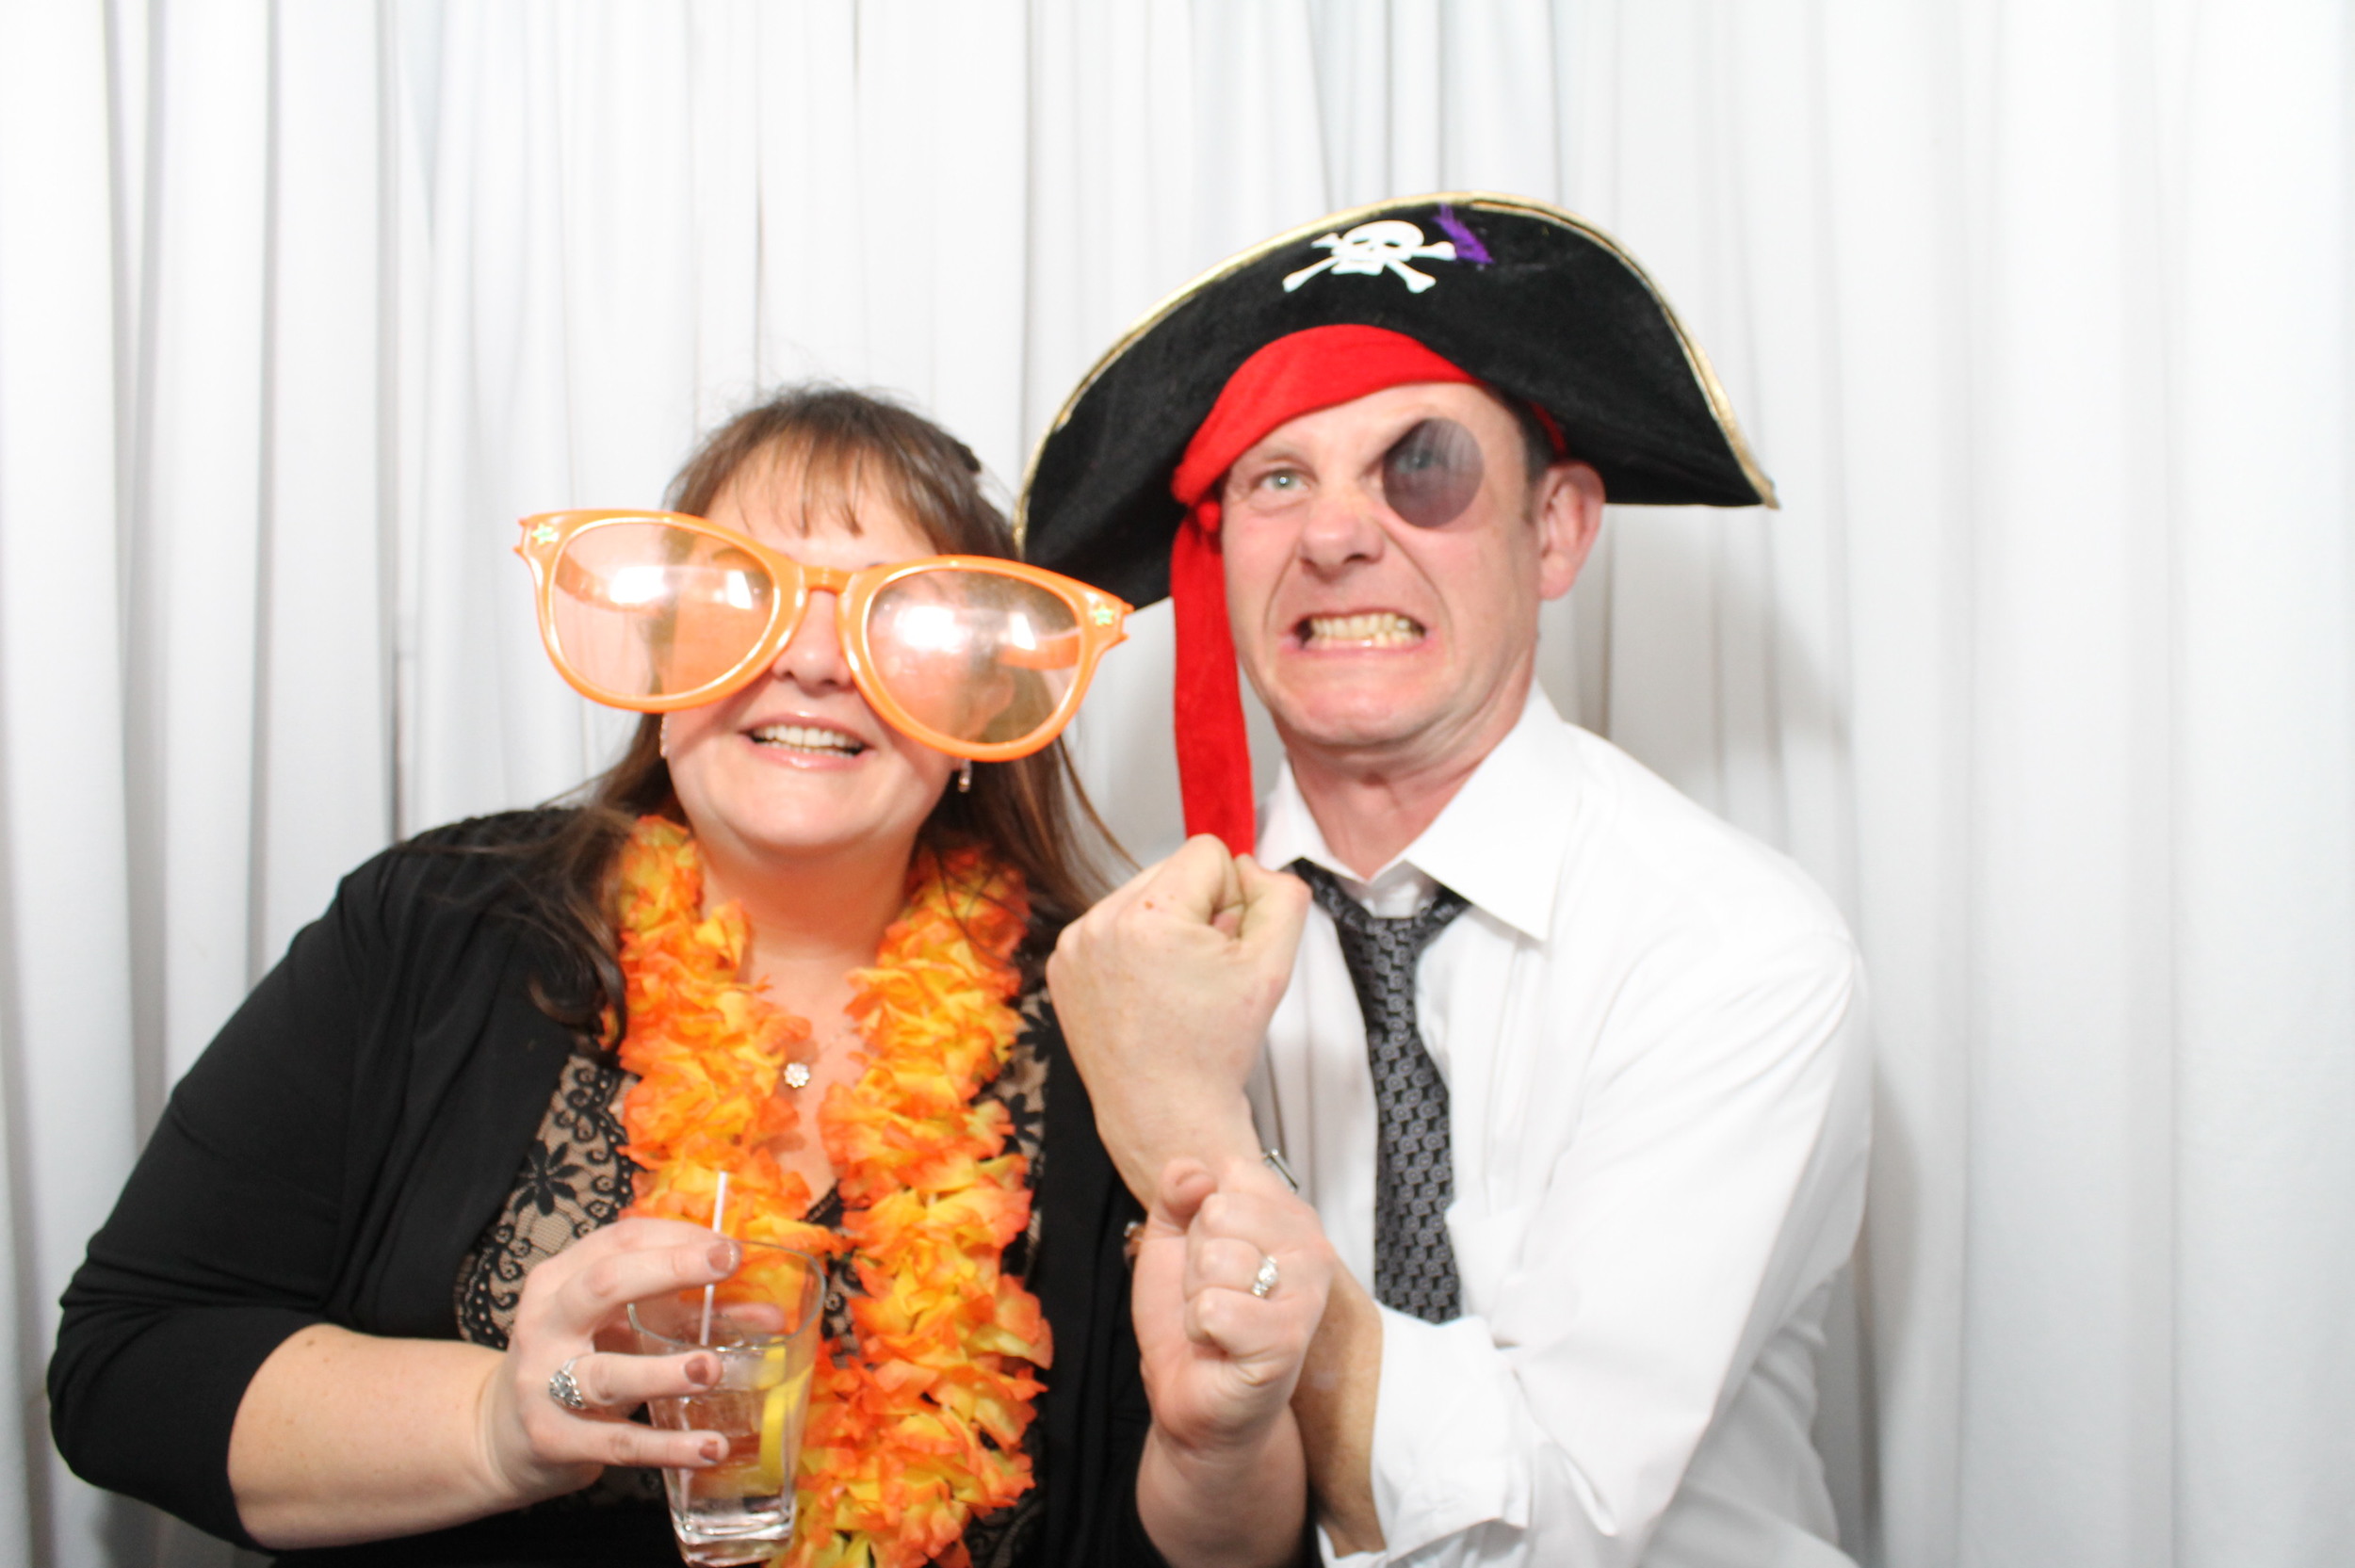 Snapshot Photobooths at Clarks Landing, Point Pleasant in New Jersey